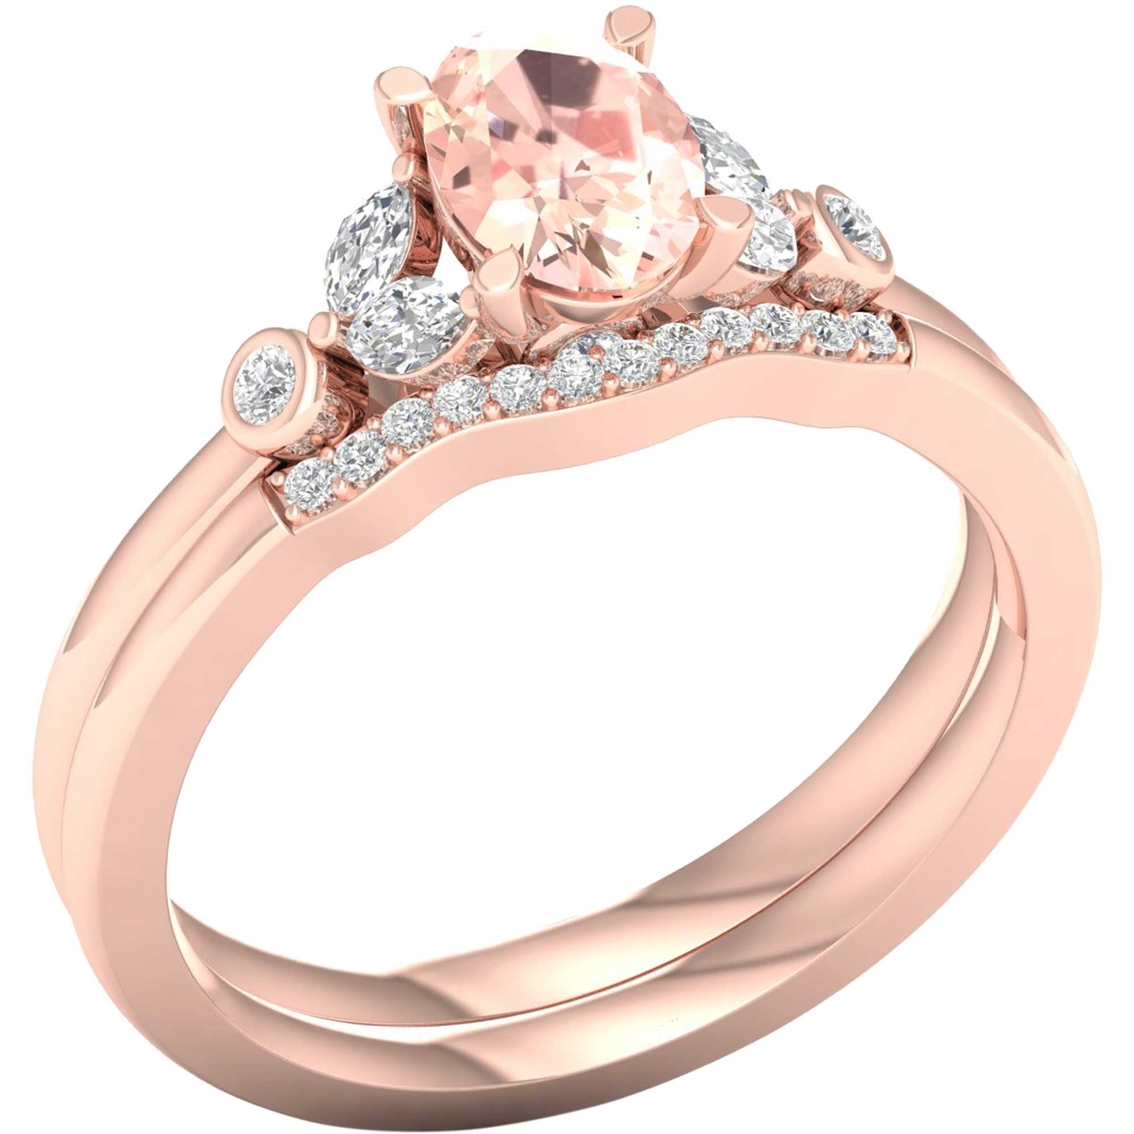 Color Bouquets by Lily 10K Gold 1/5 CTW Diamond and Genuine Morganite Bridal Set - Image 2 of 4